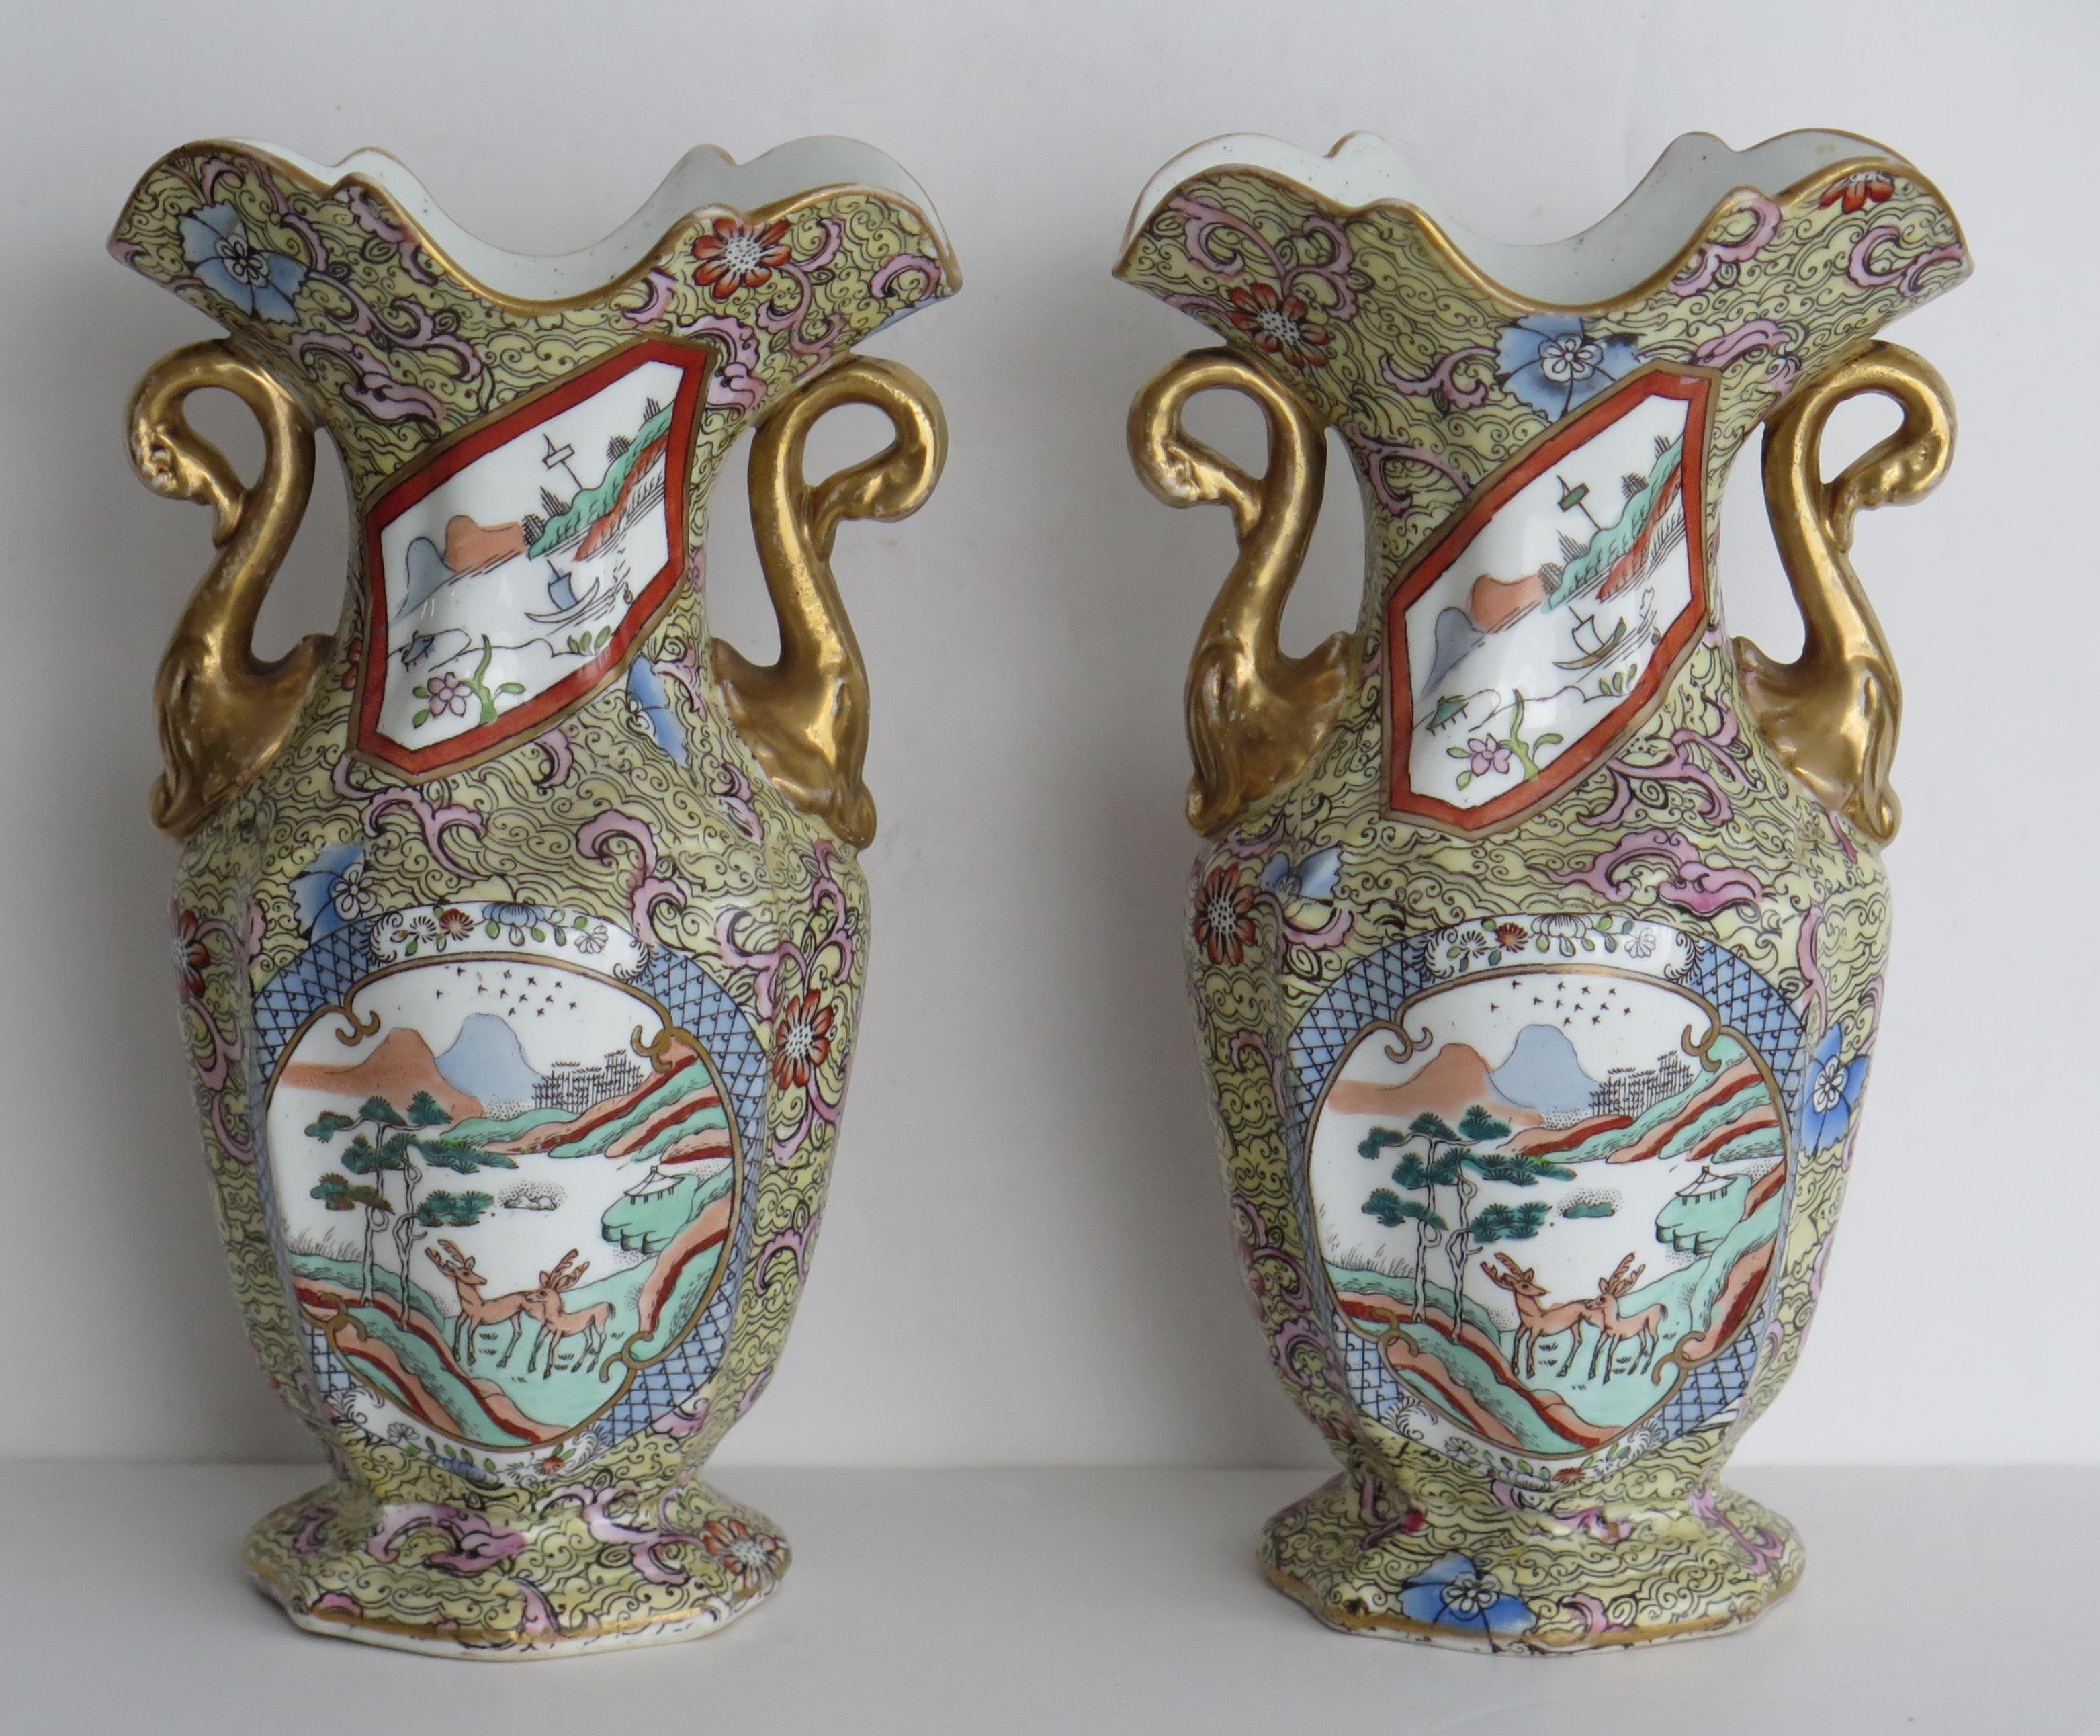 These are a rare and very decorative pair of ironstone twin handled vases made by the English Mason's Ironstone factory, dating to the late Georgian period, circa 1820.

The body is well potted with a hexagonal baluster form, a flaired wavy rim